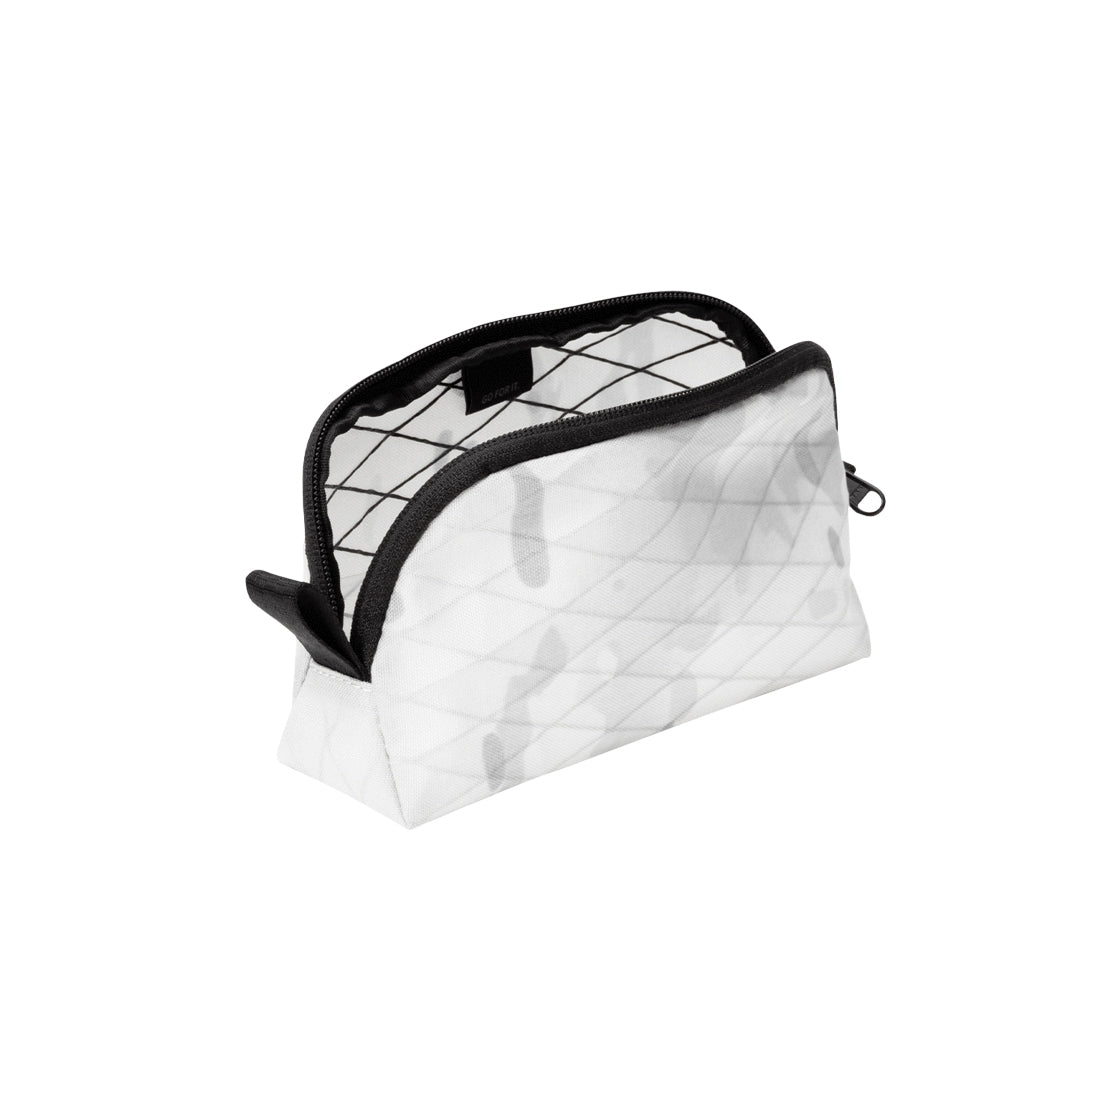 Able Carry : The Daily Stash Pouch : X-Pac White Alpine (X50)